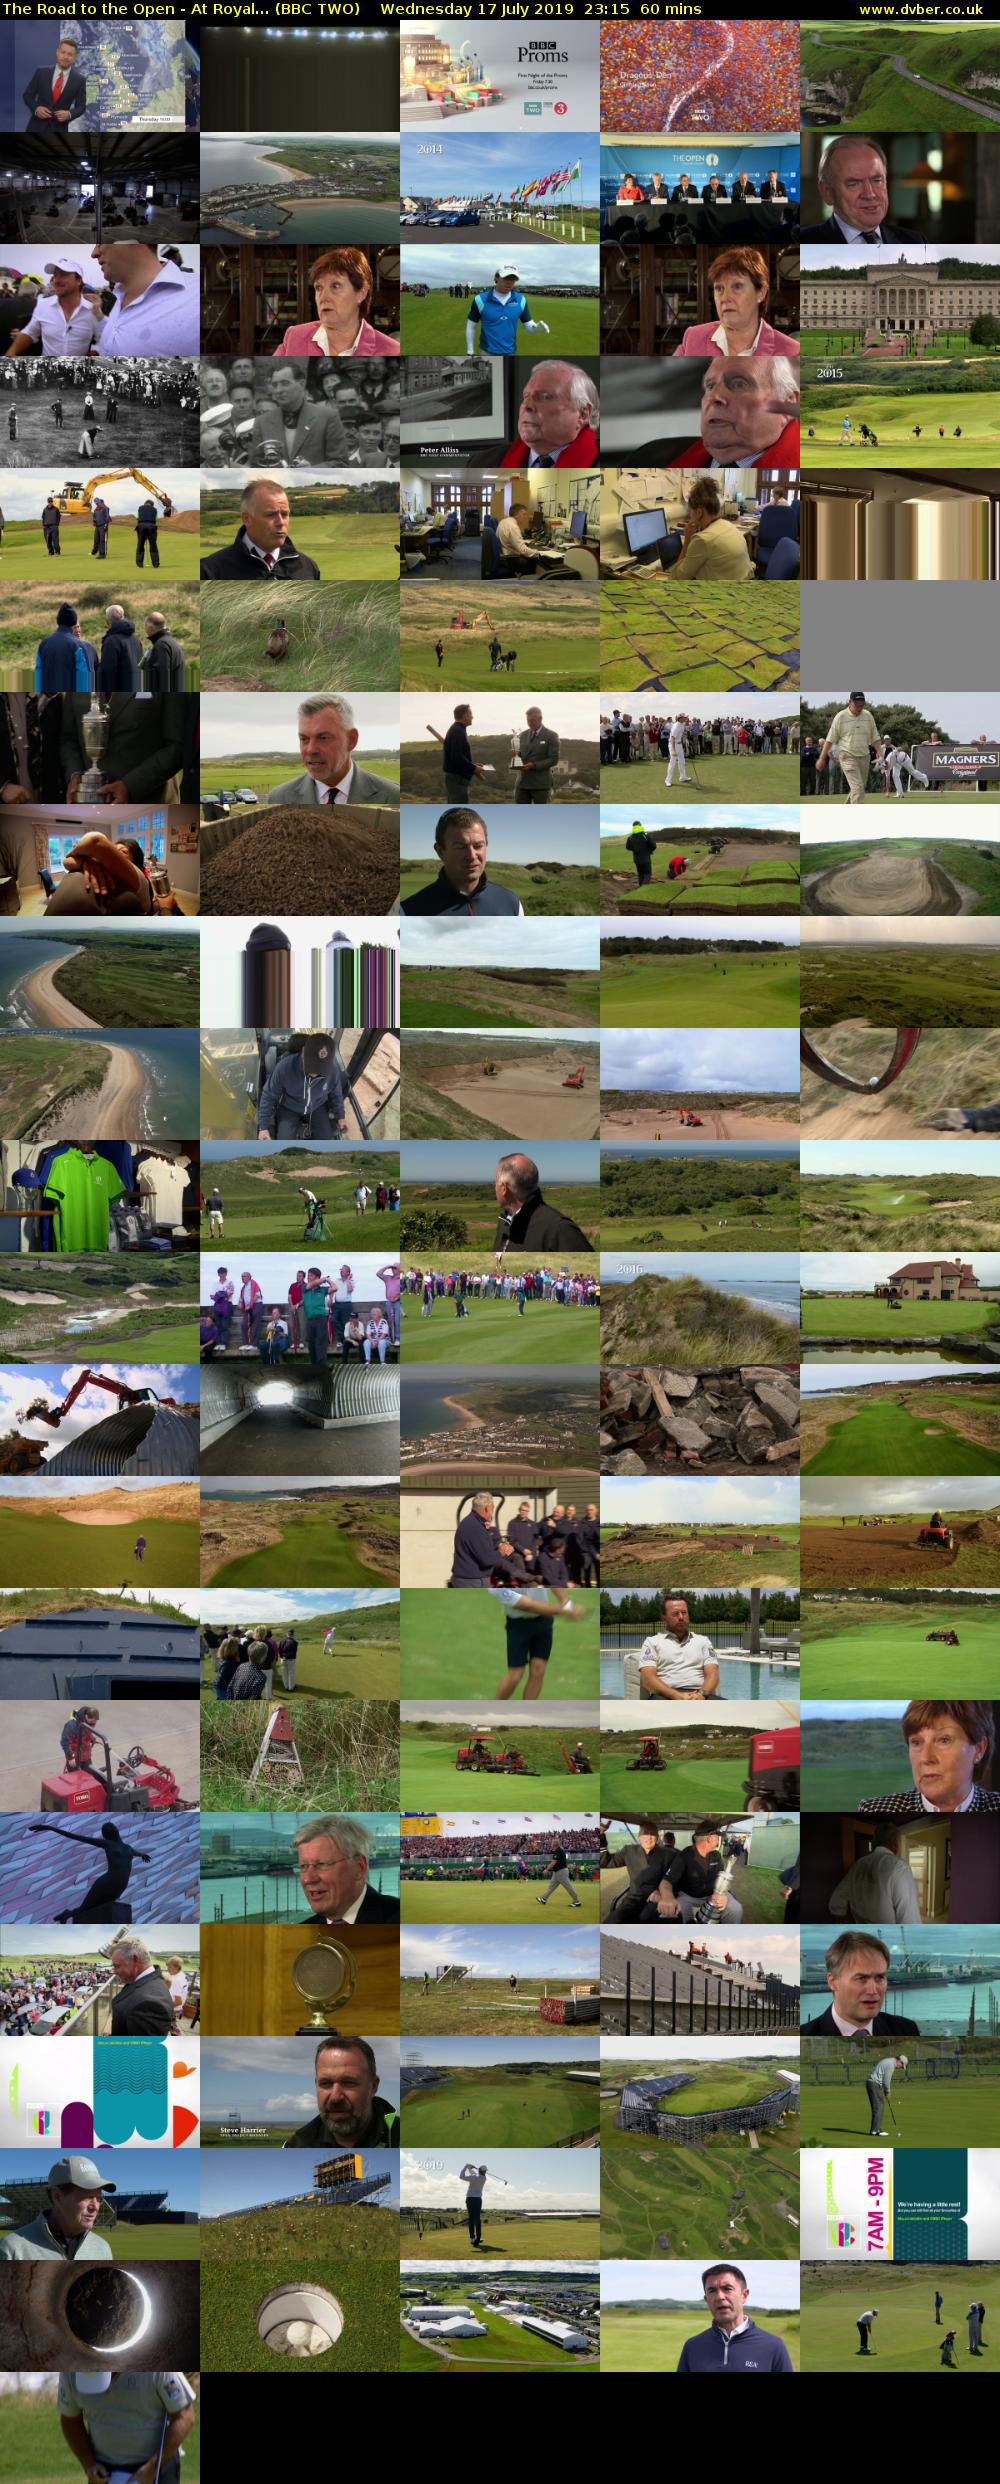 The Road to the Open - At Royal... (BBC TWO) Wednesday 17 July 2019 23:15 - 00:15